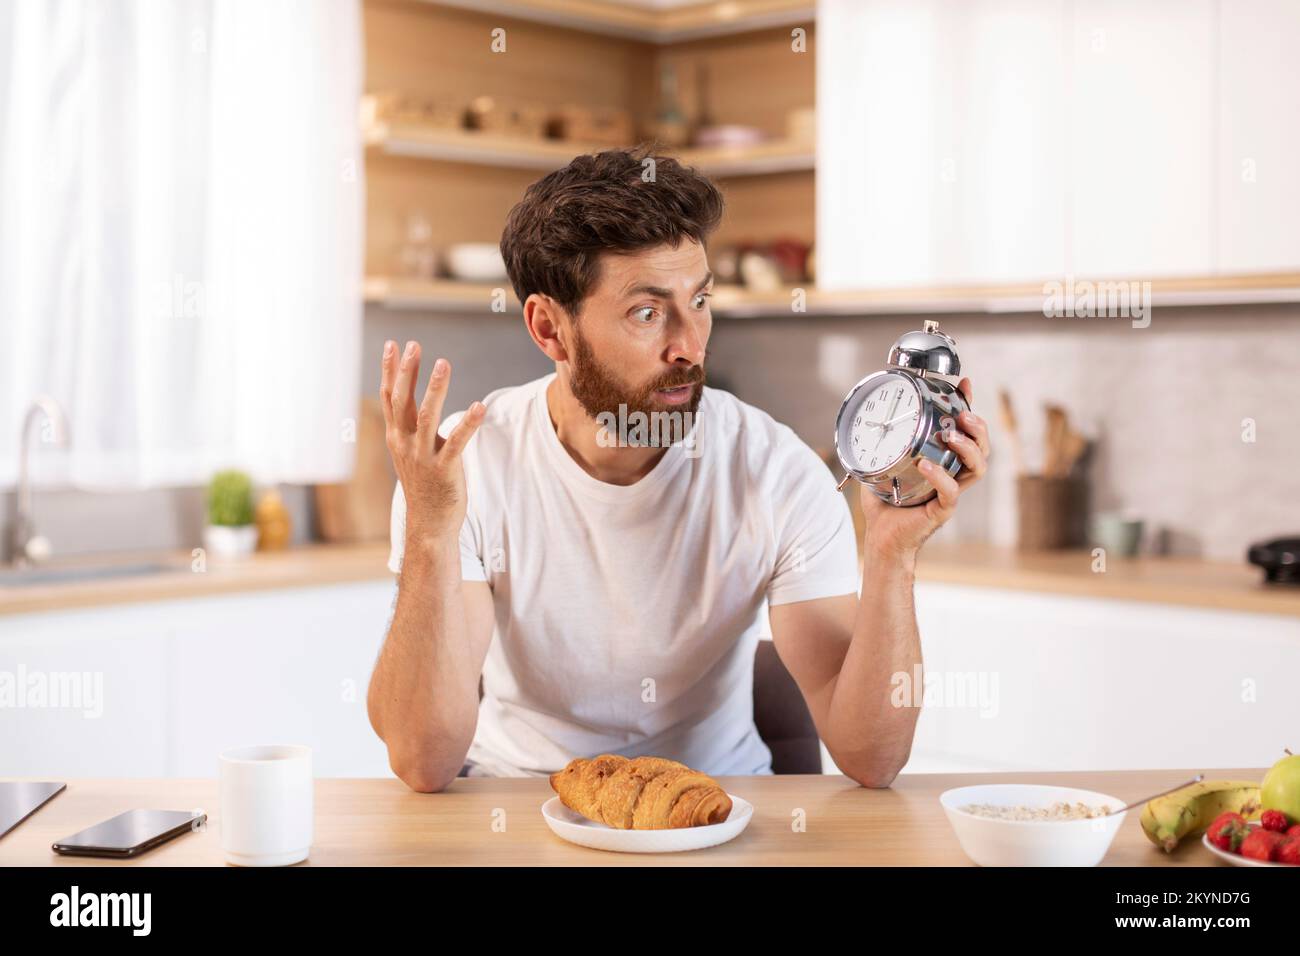 Shocked sad adult caucasian man with beard in white t-shirt looks at alarm clock and late to meet or work Stock Photo